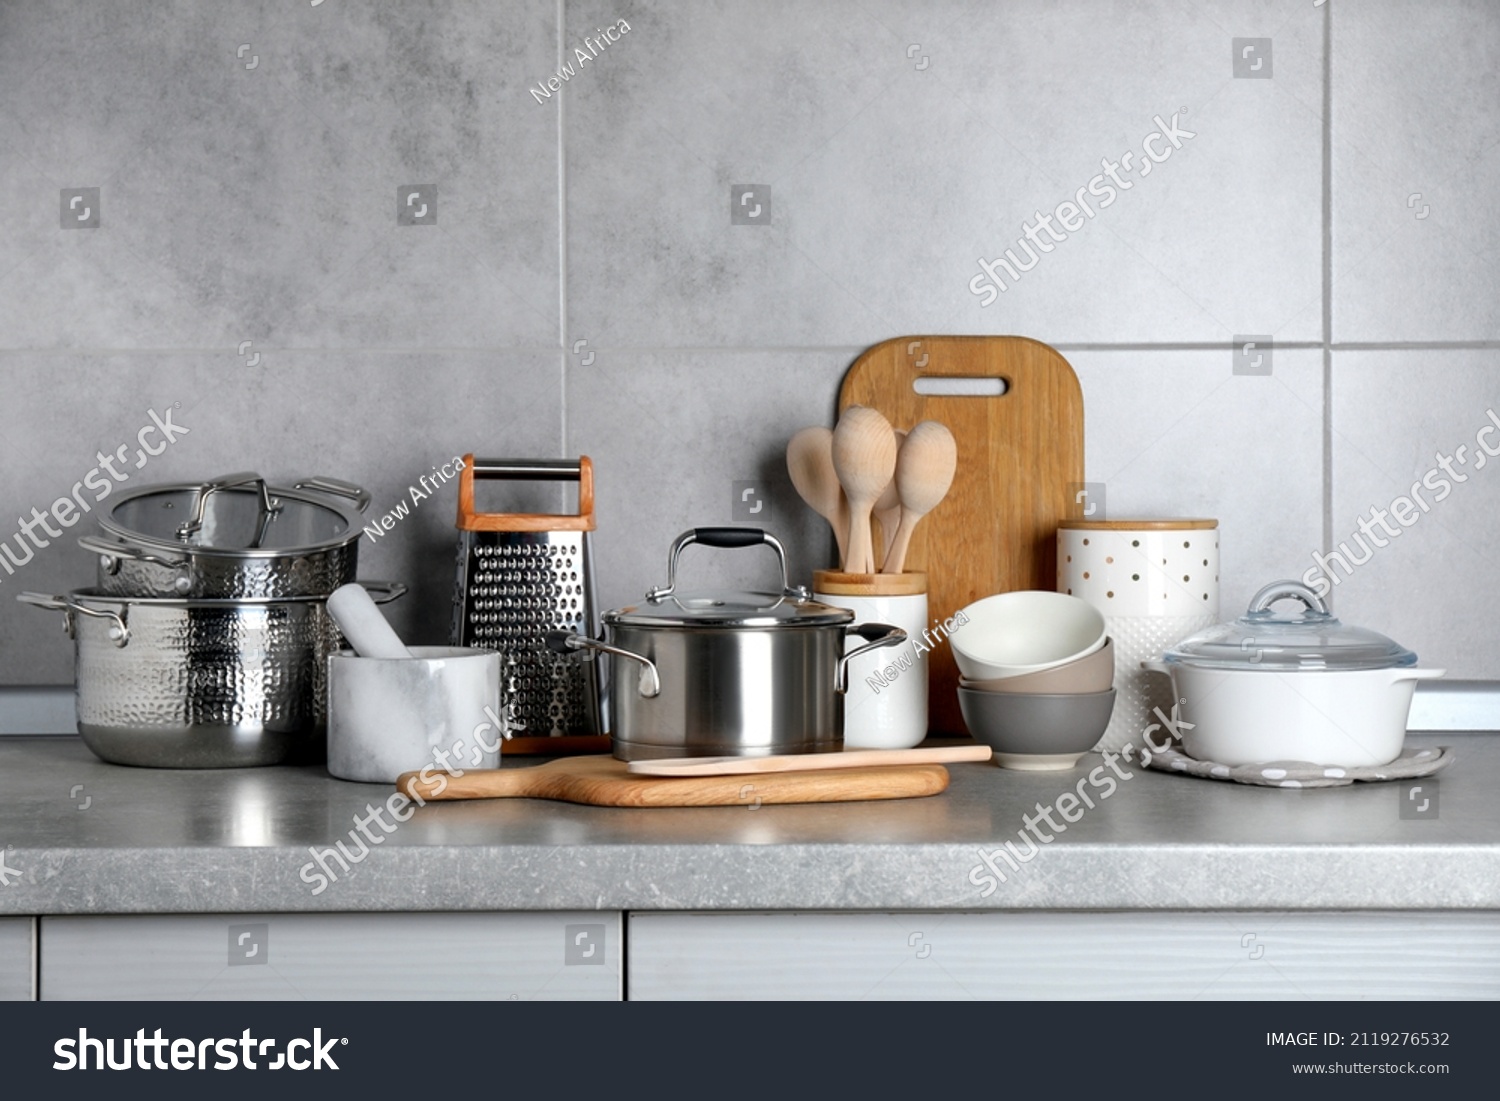 Set of different cooking utensils on grey countertop in kitchen #2119276532